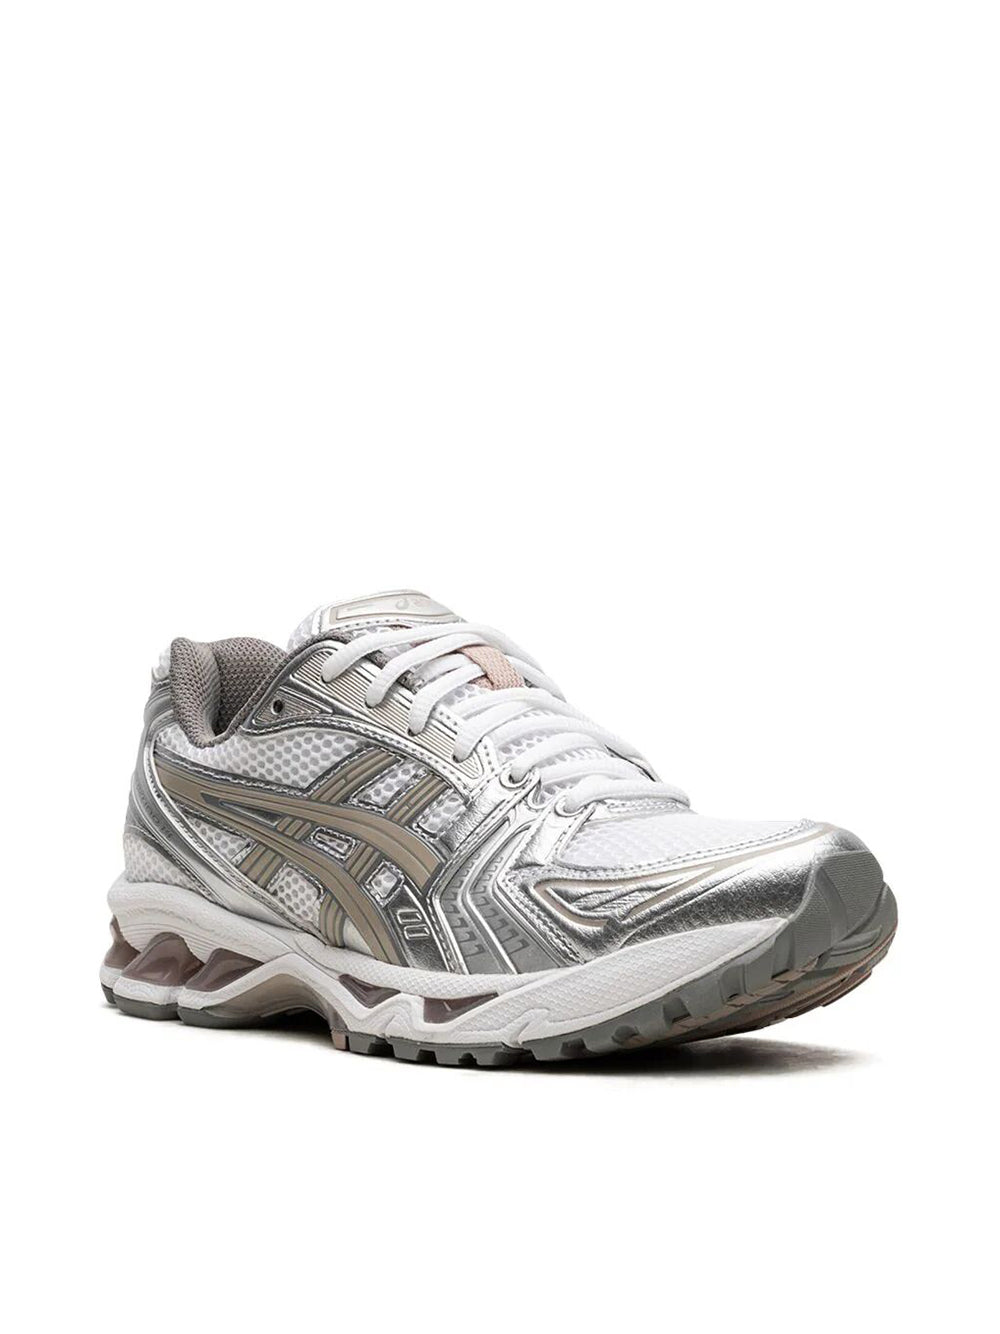 White and Silver Gel-Kayano 14 sneakers